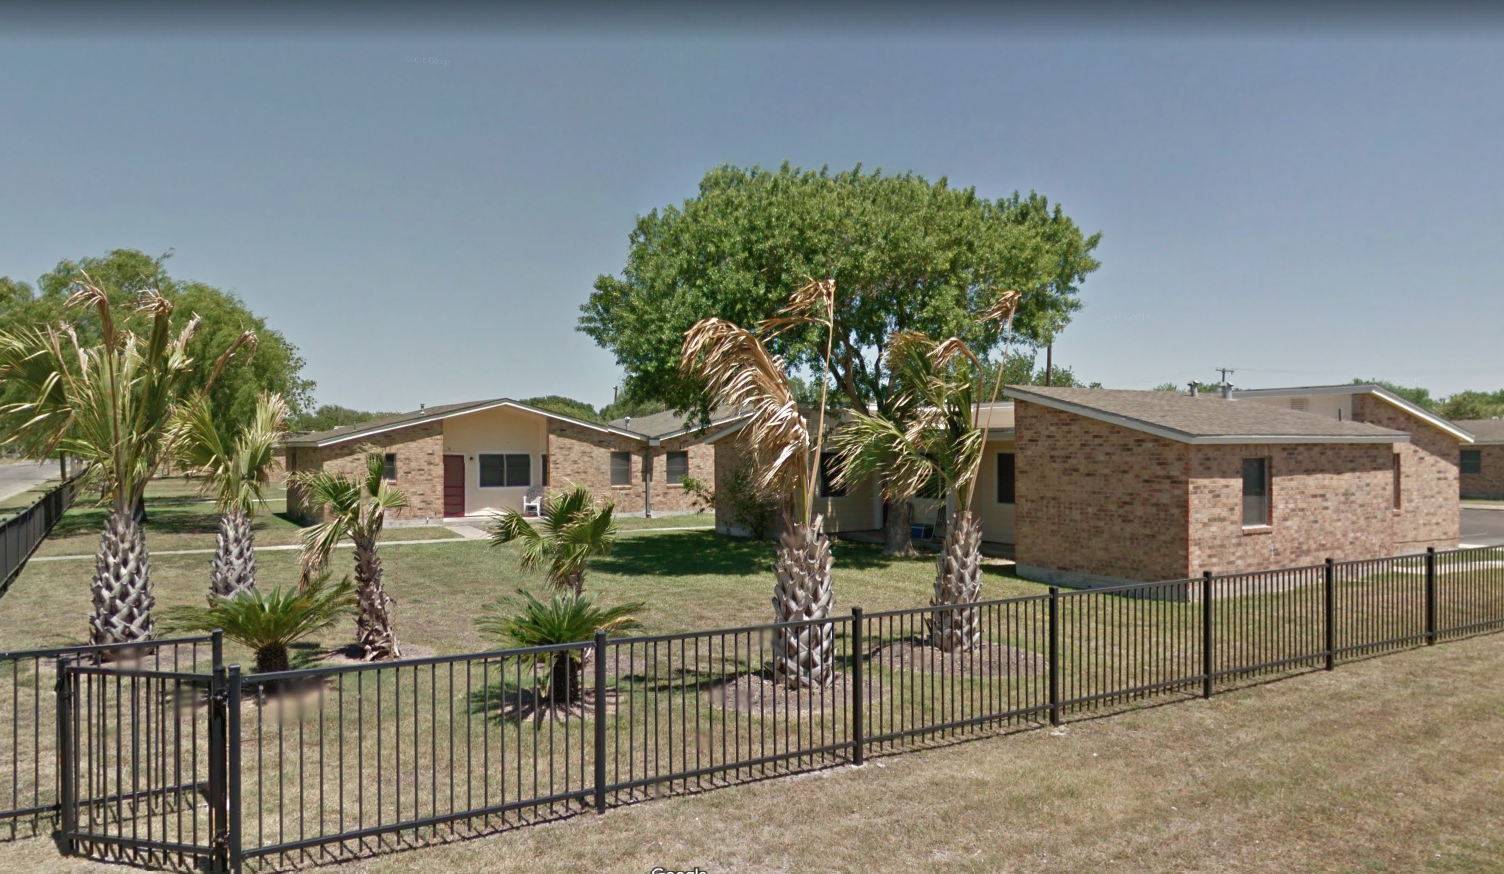 KINGSVILLE LULAC MANOR APARTMENTS